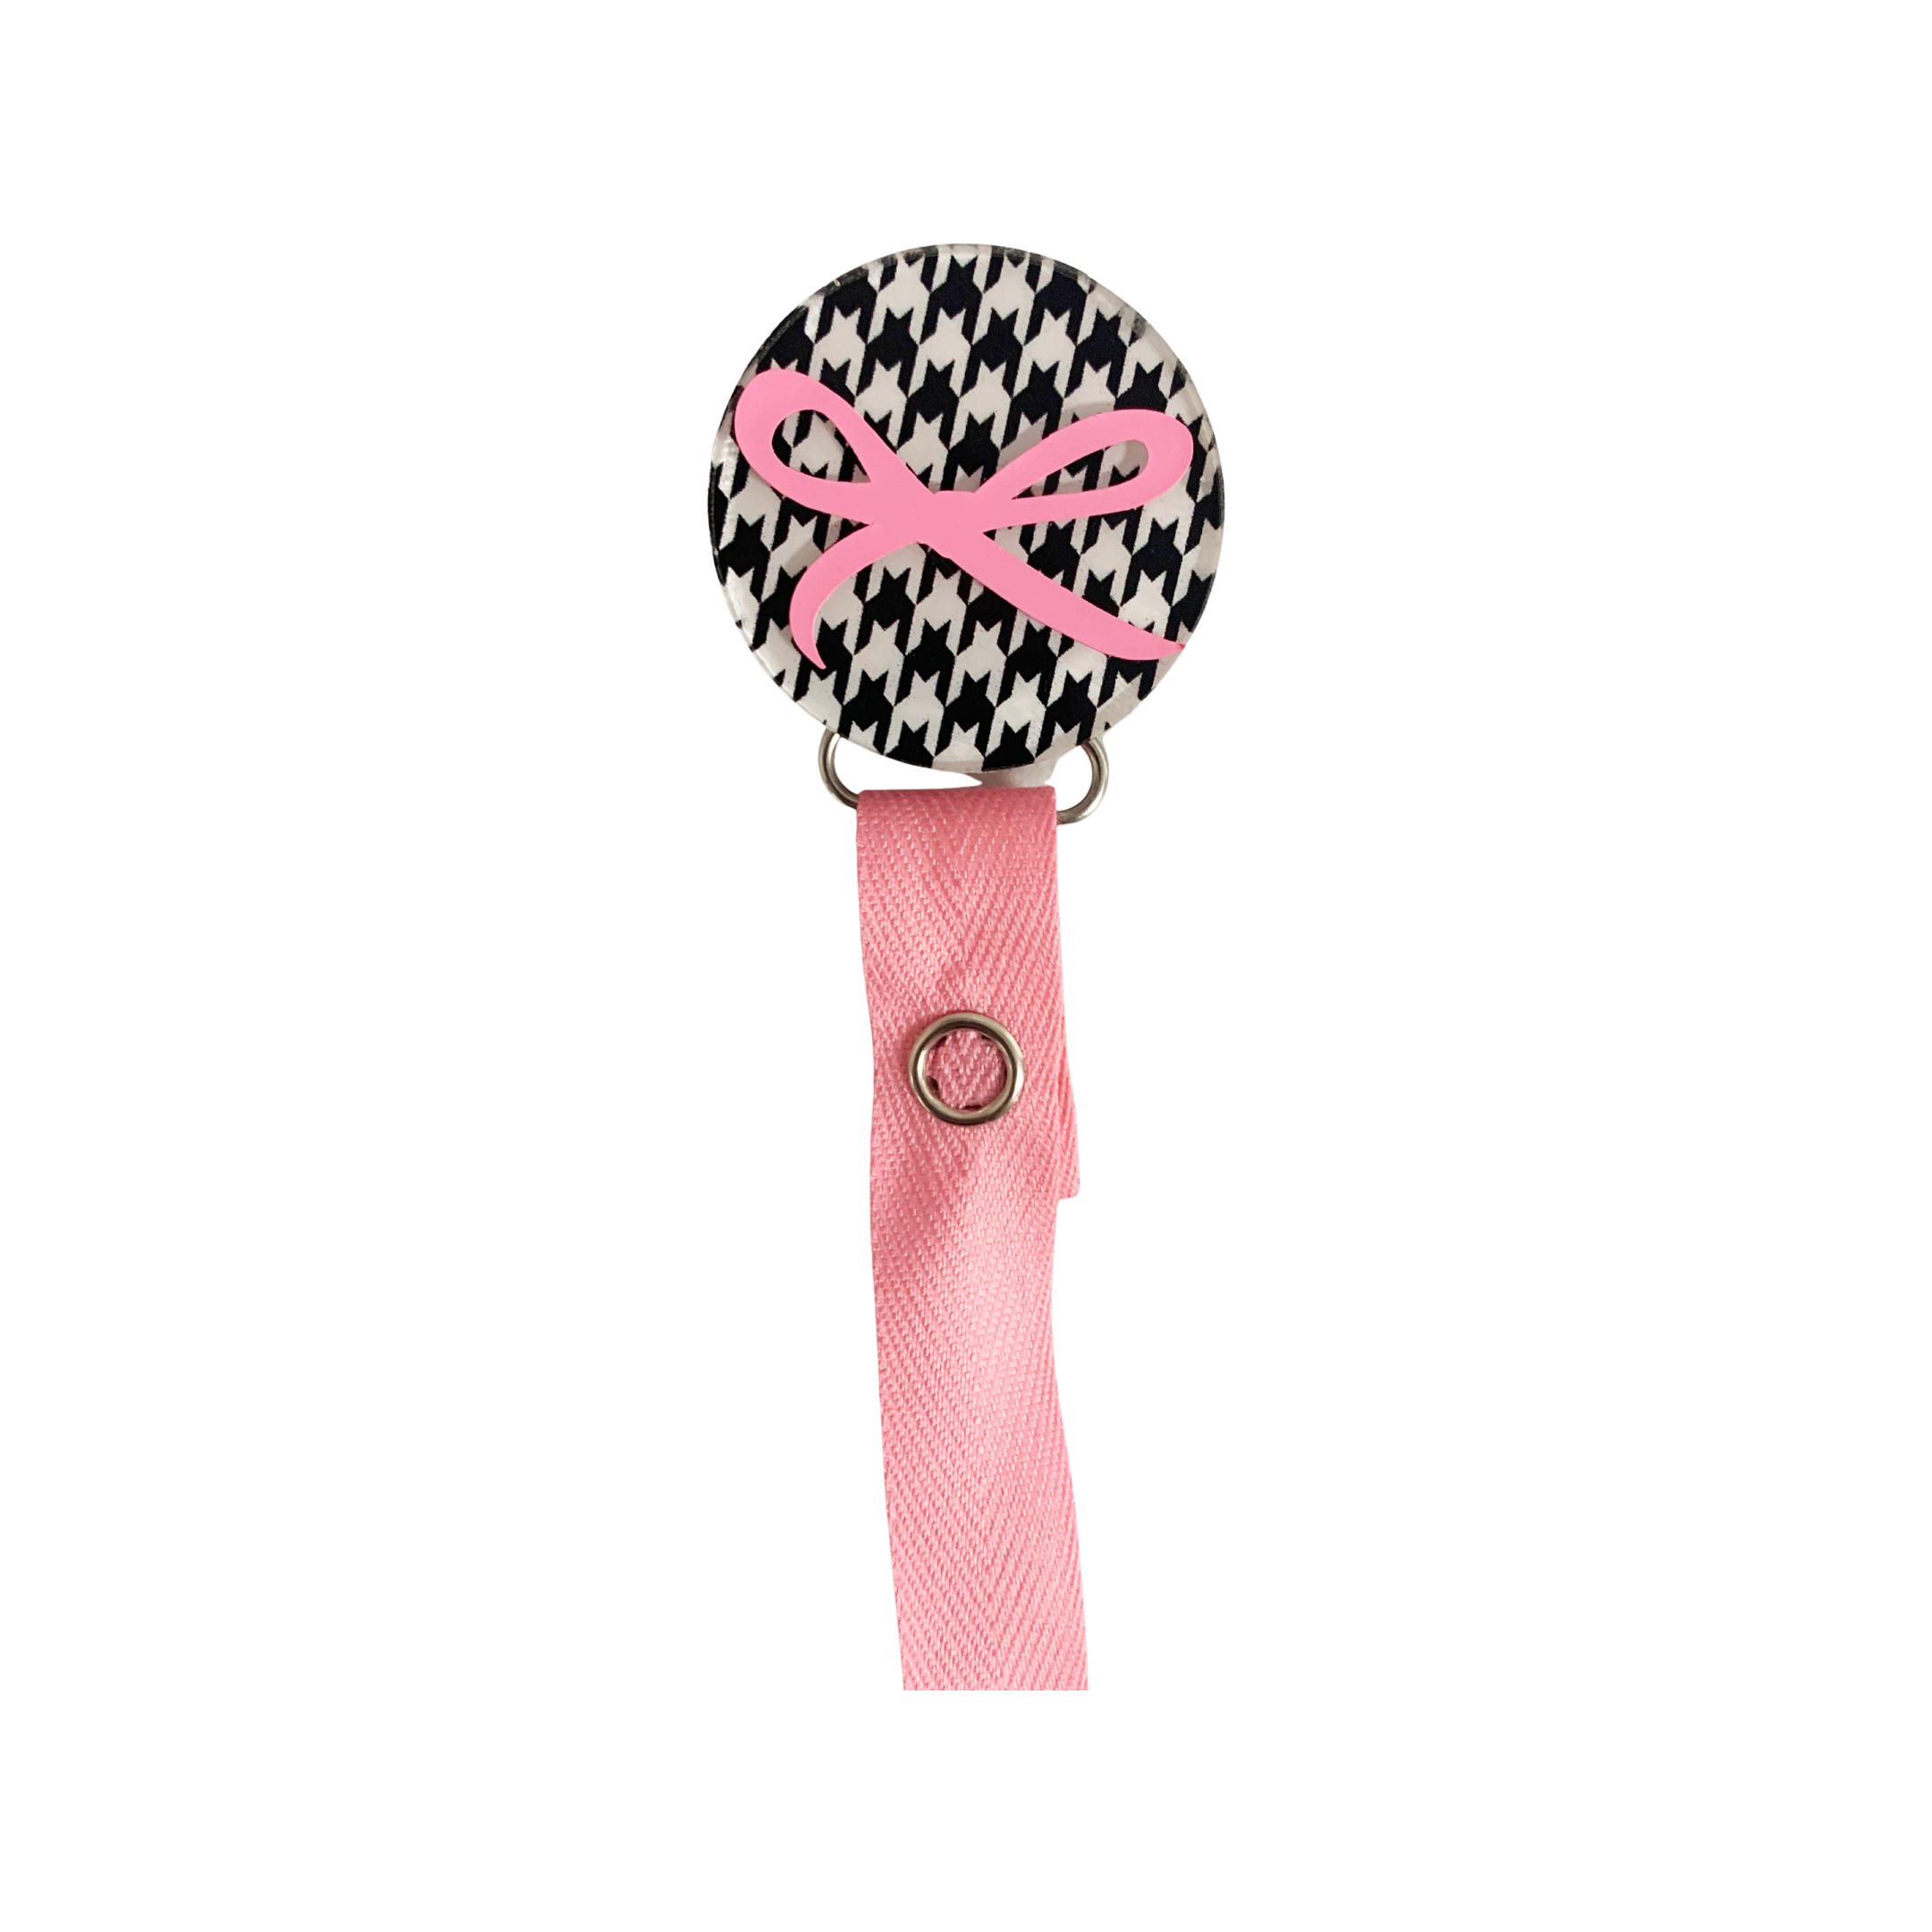 Classy Paci Houndstooth Black White Check with pink Bow, white, gold, baby girl pacifier clip